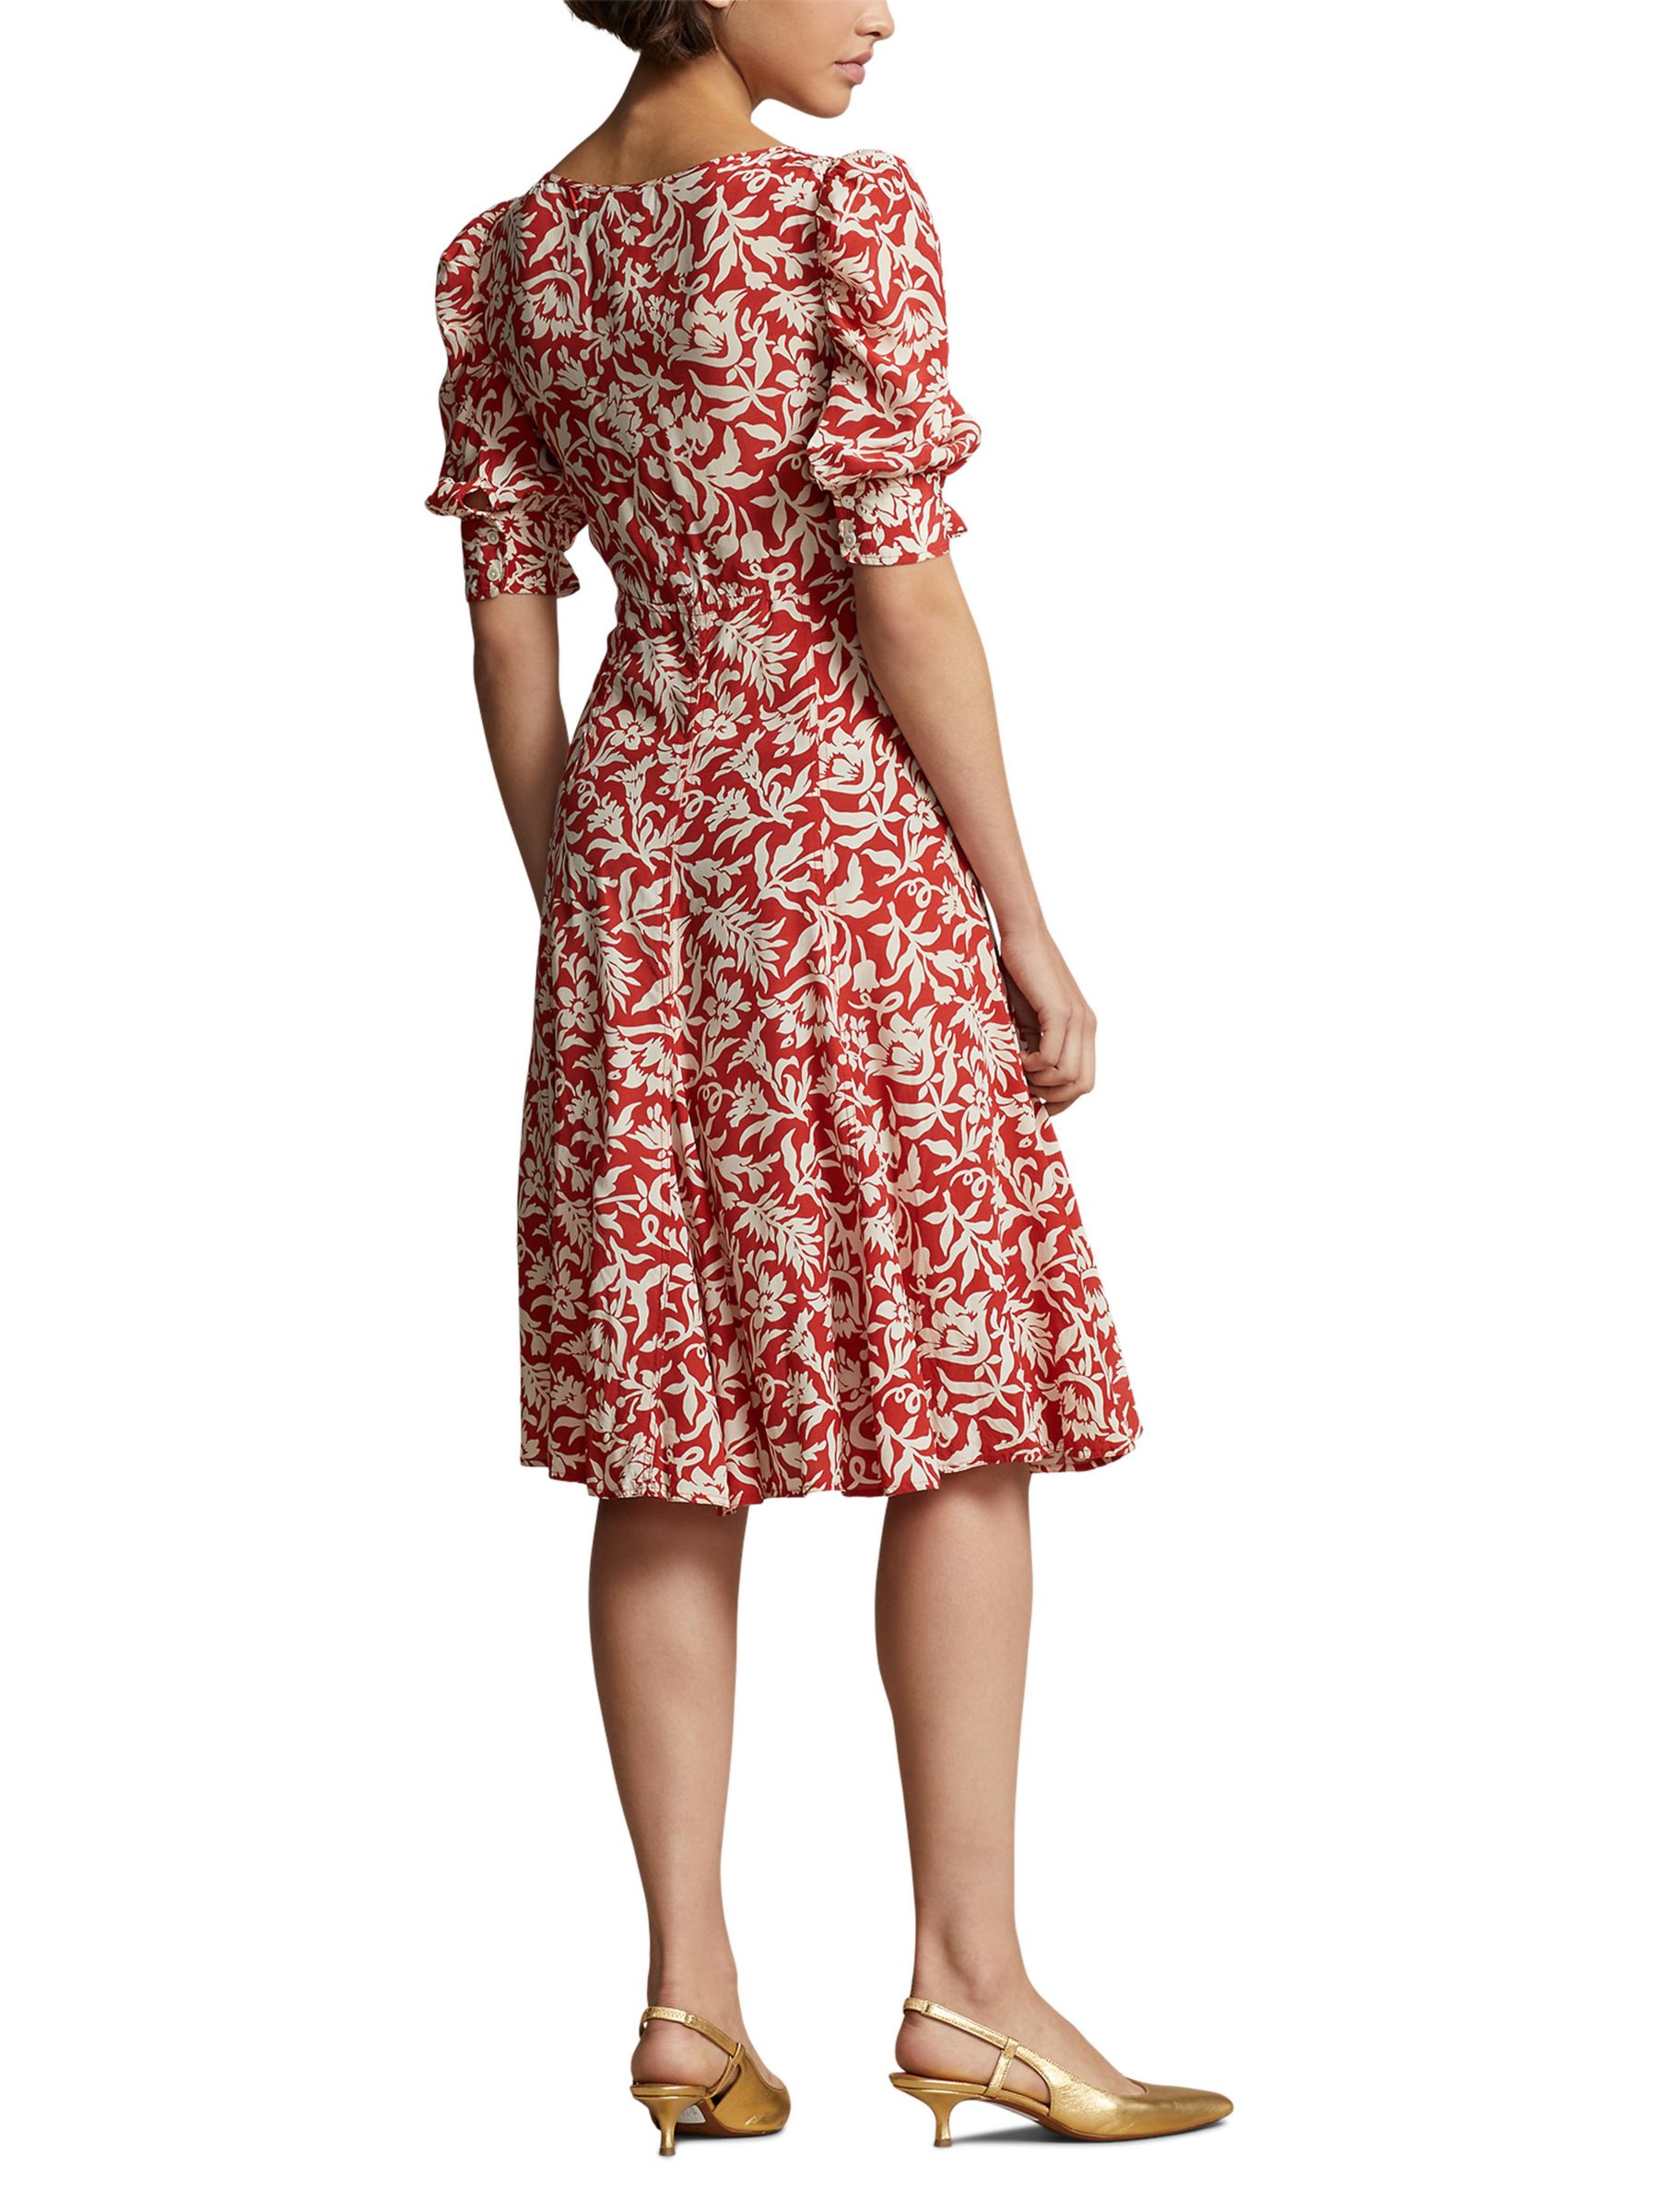 Polo Ralph Lauren Teo Floral Print Dress, Spring Lily at John Lewis ...